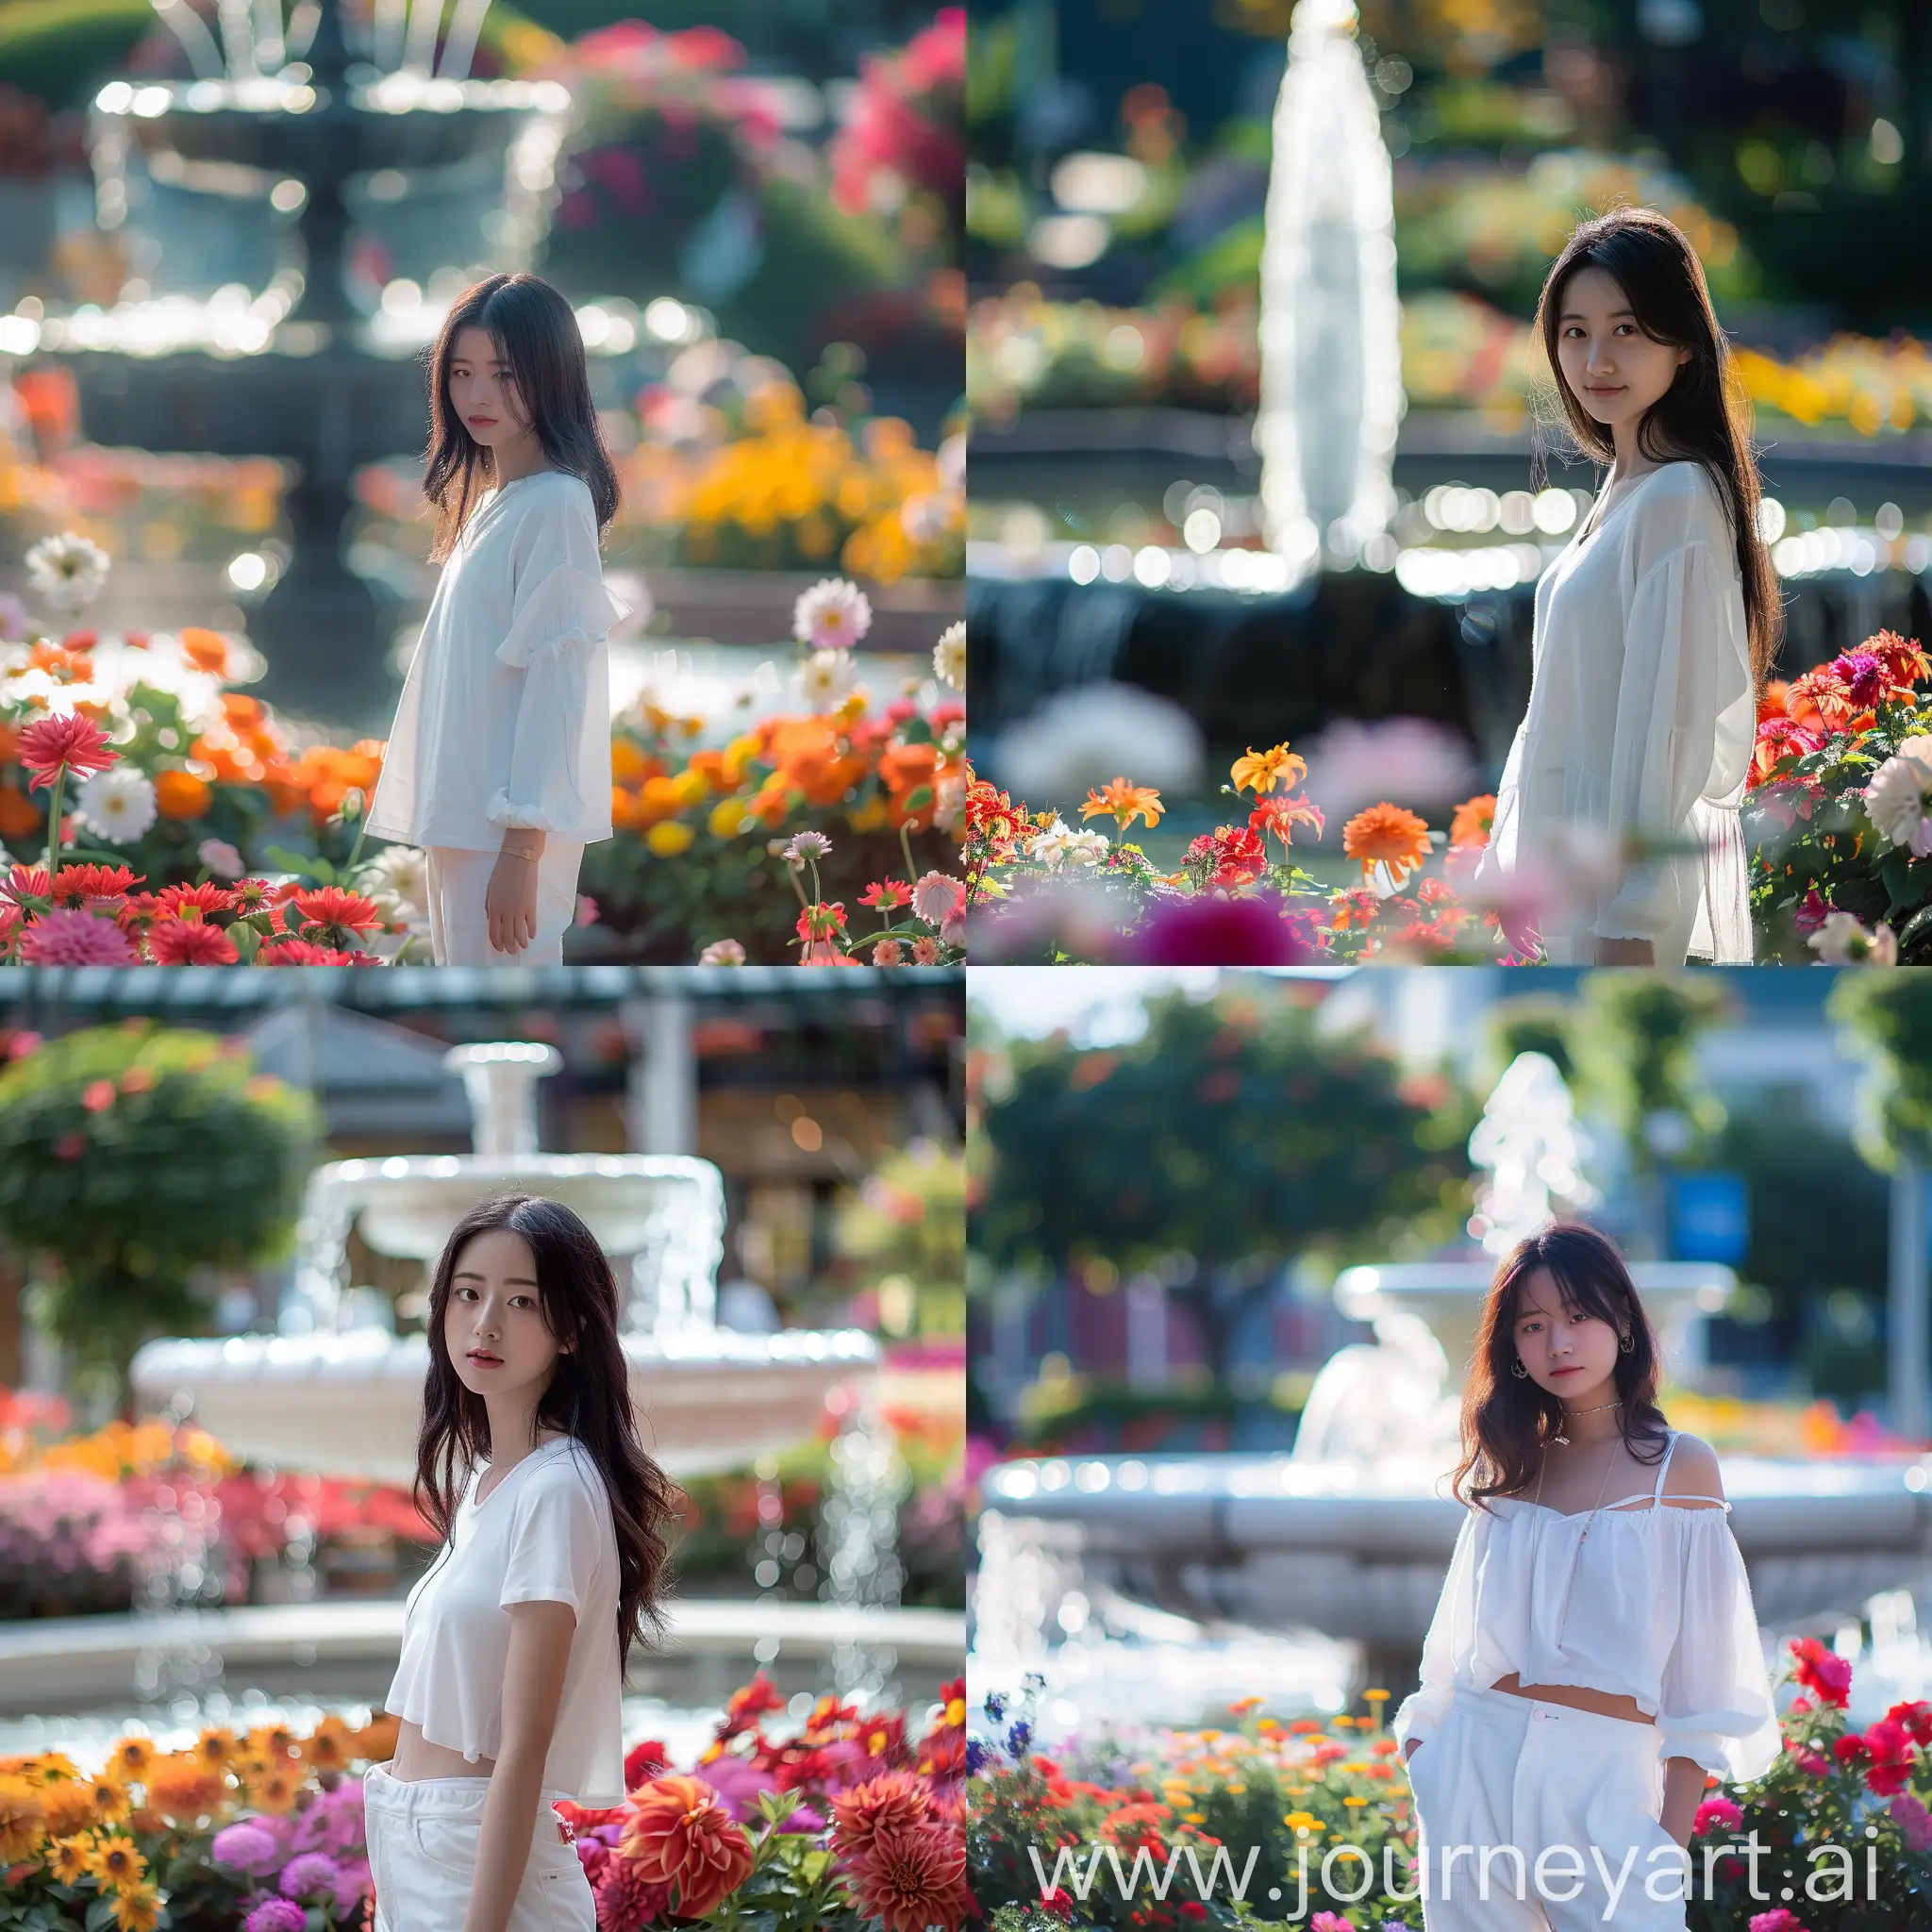 Tranquil-Asian-Woman-in-White-Amidst-Colorful-Garden-Fountain